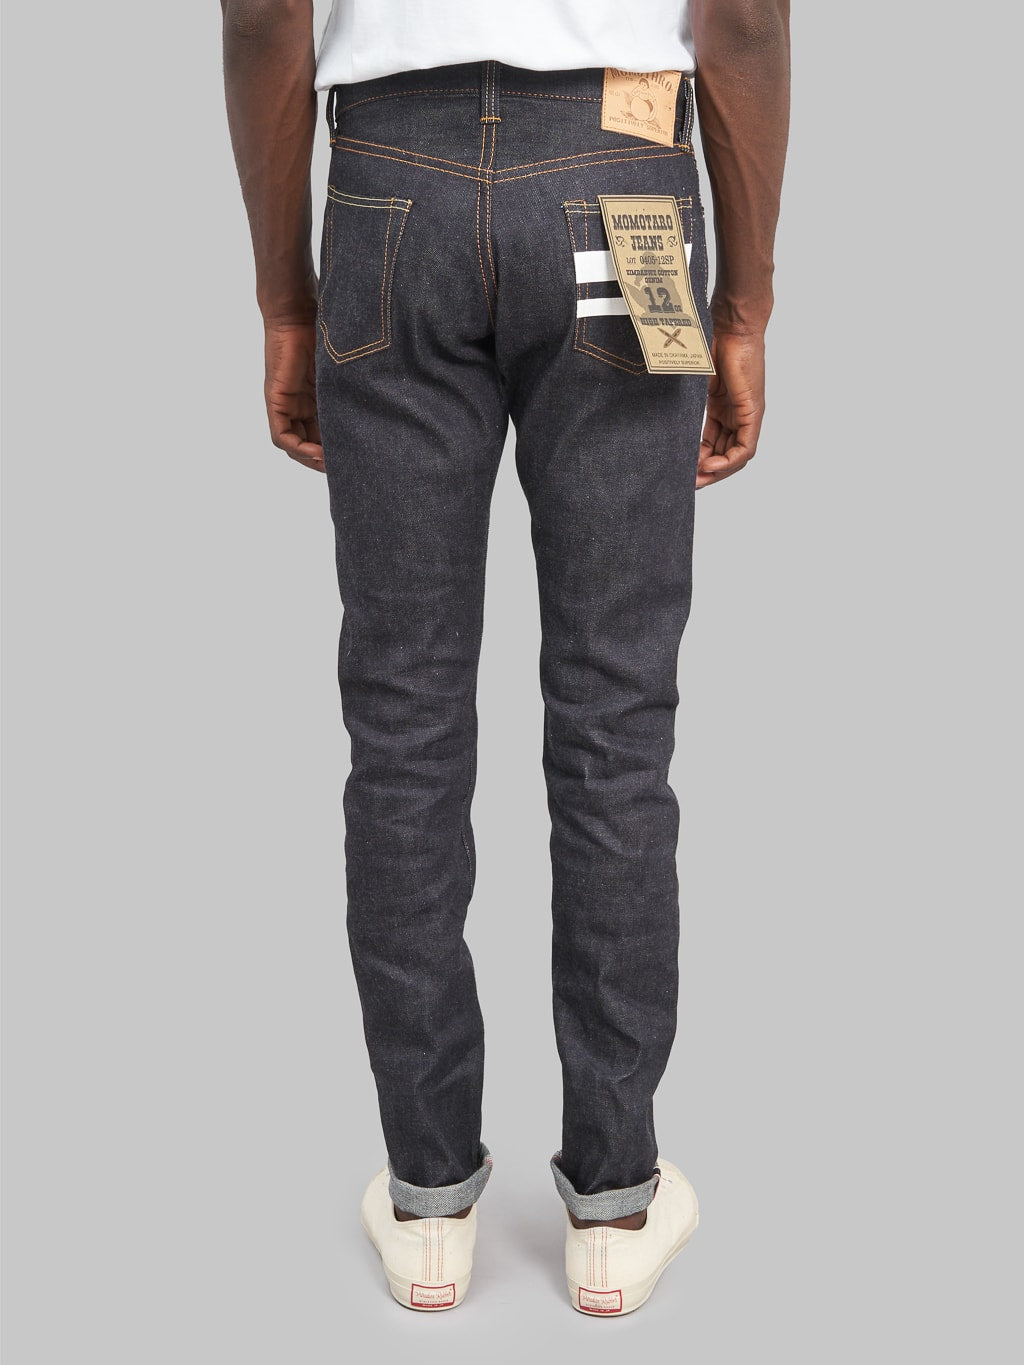 Momotaro 0405 12 going to batle 12oz high Tapered Jeans back look